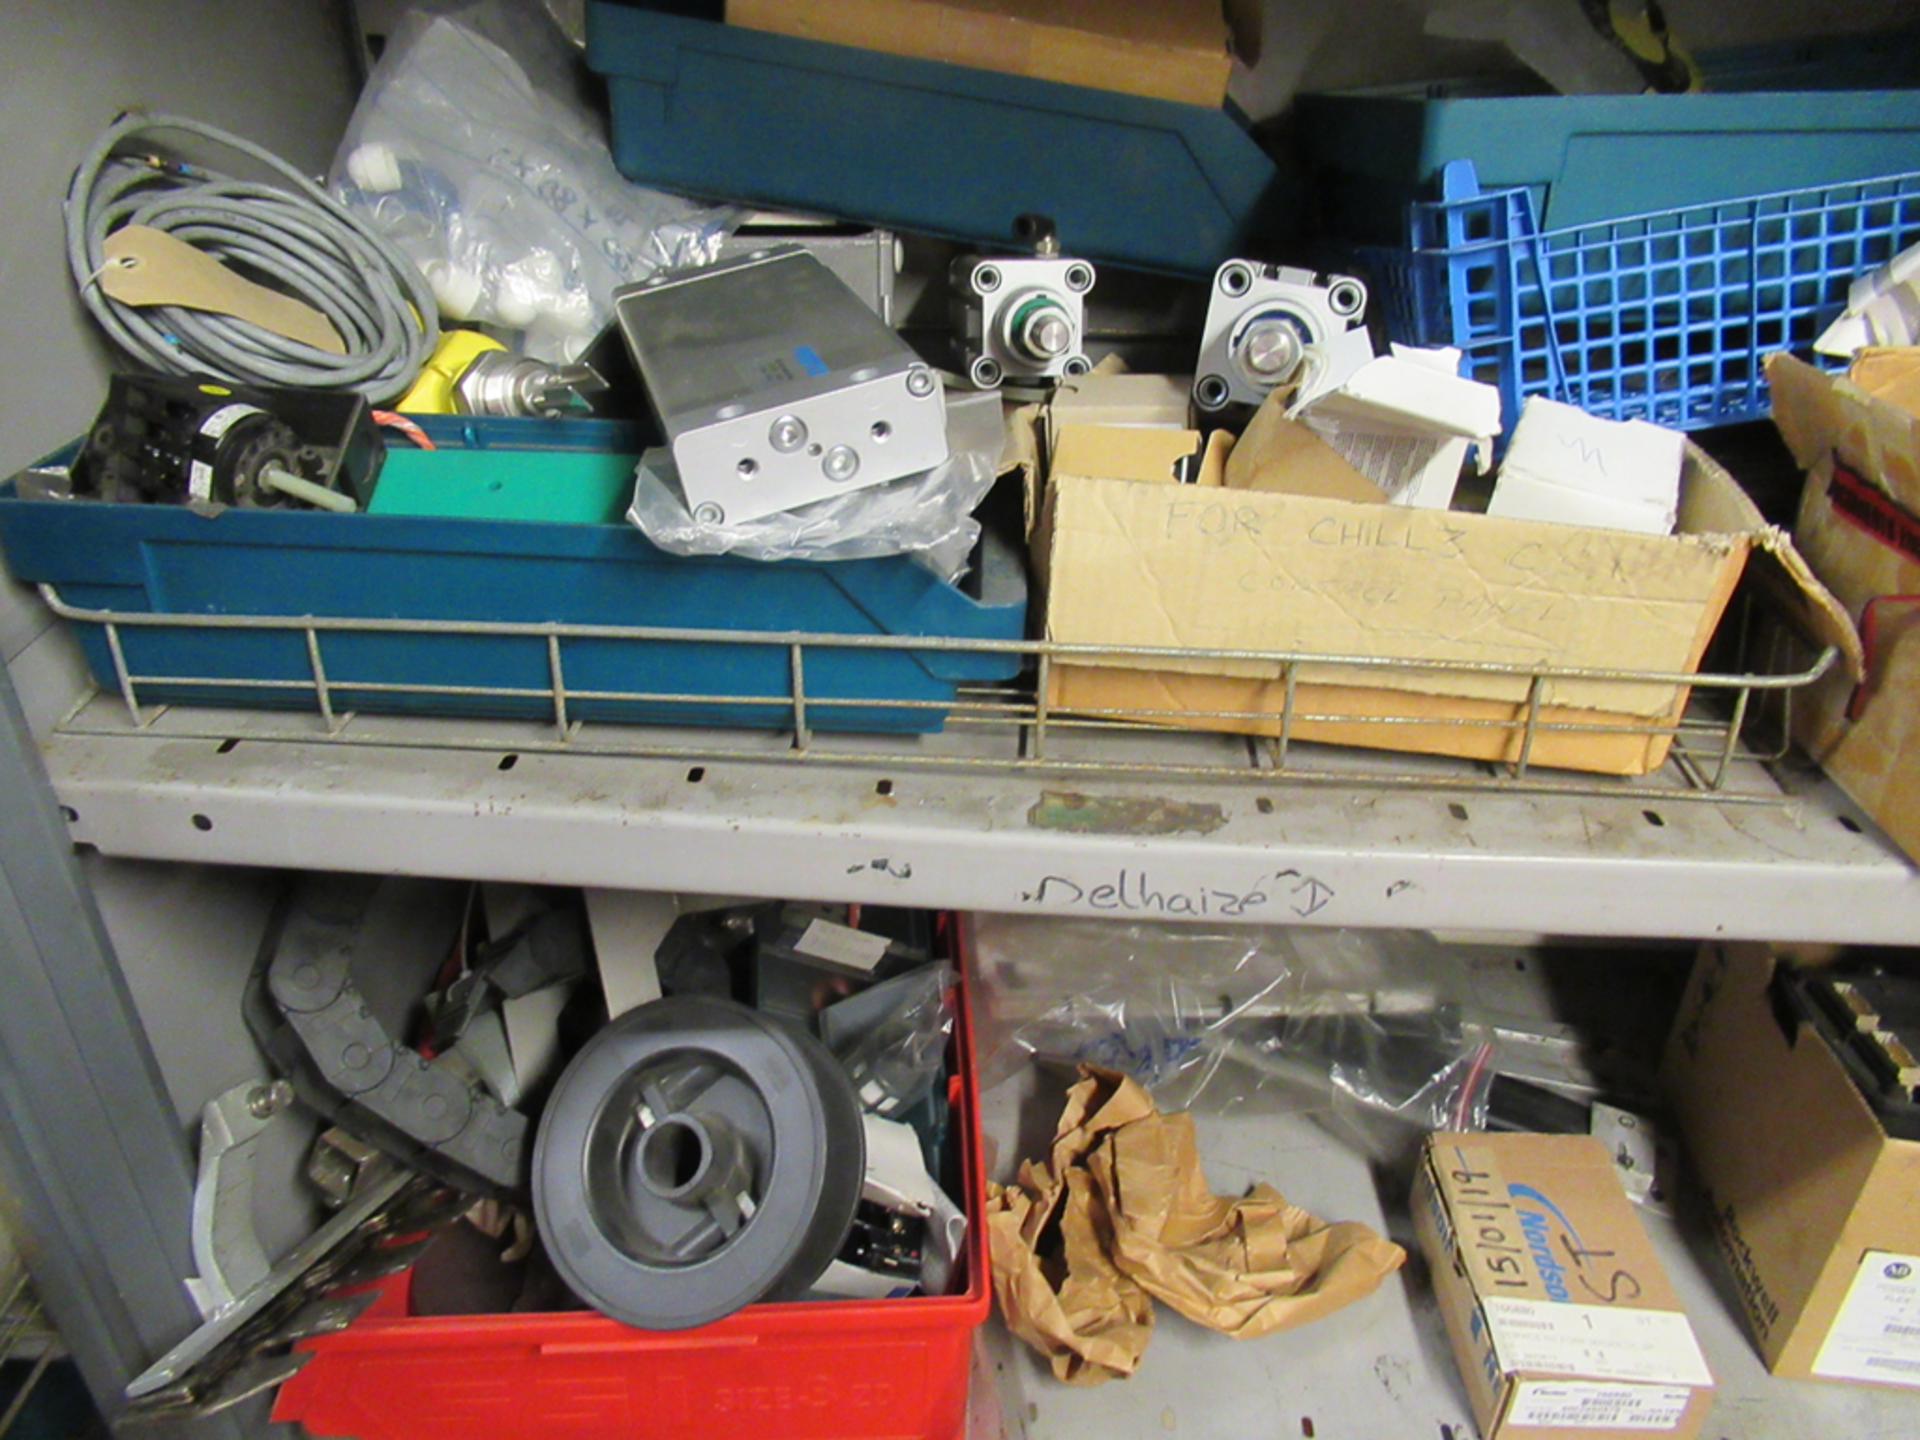 Content of 12-bays of Shelving to include Larqge qty of Spare Parts, Cable, Assorted Bearings, Valve - Image 20 of 38